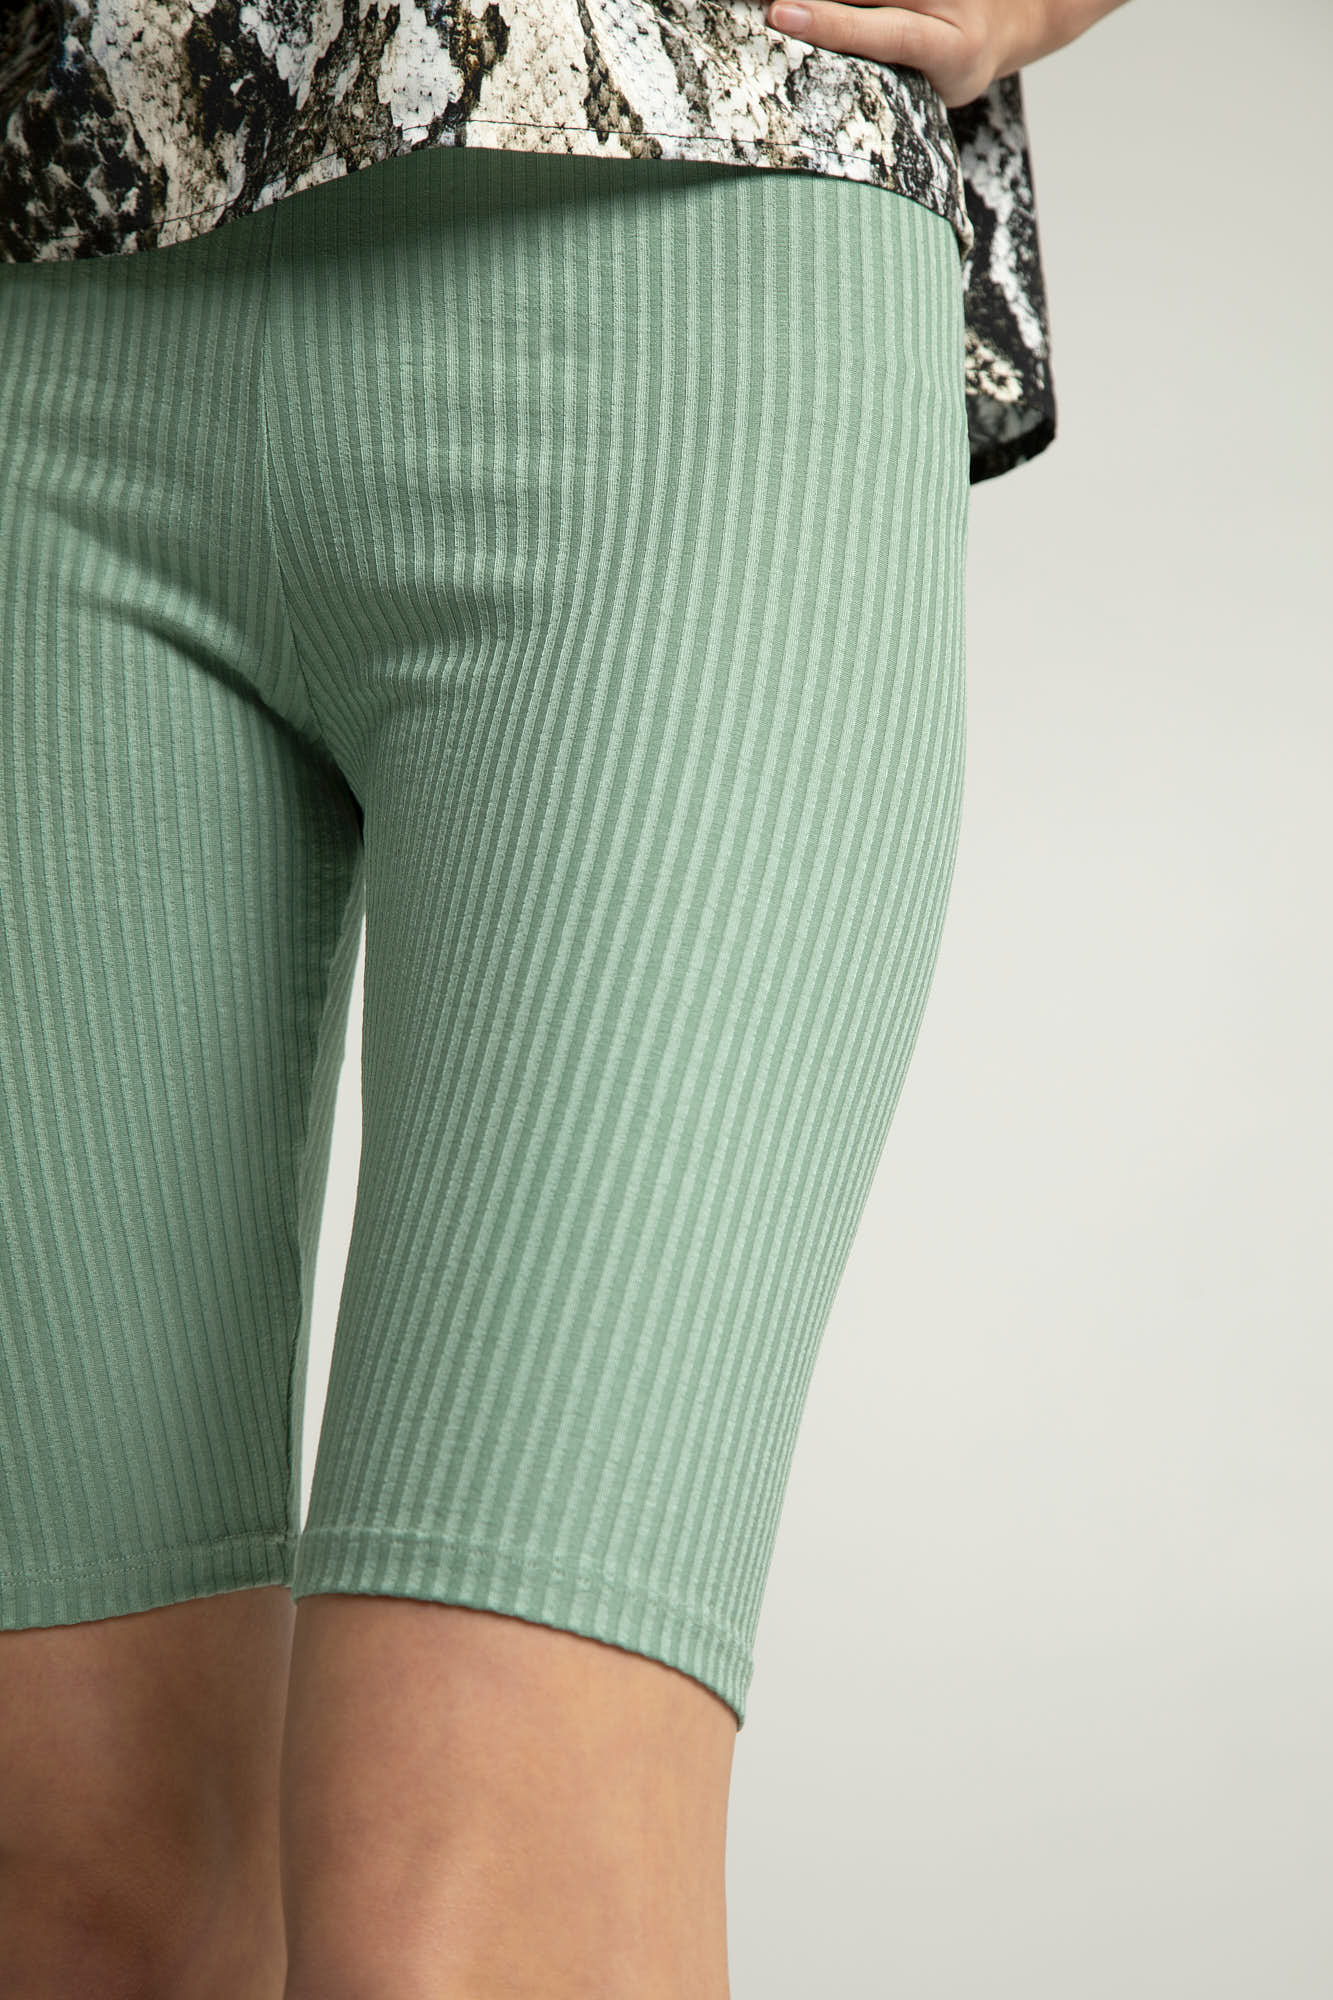 AENIS cycling shorts